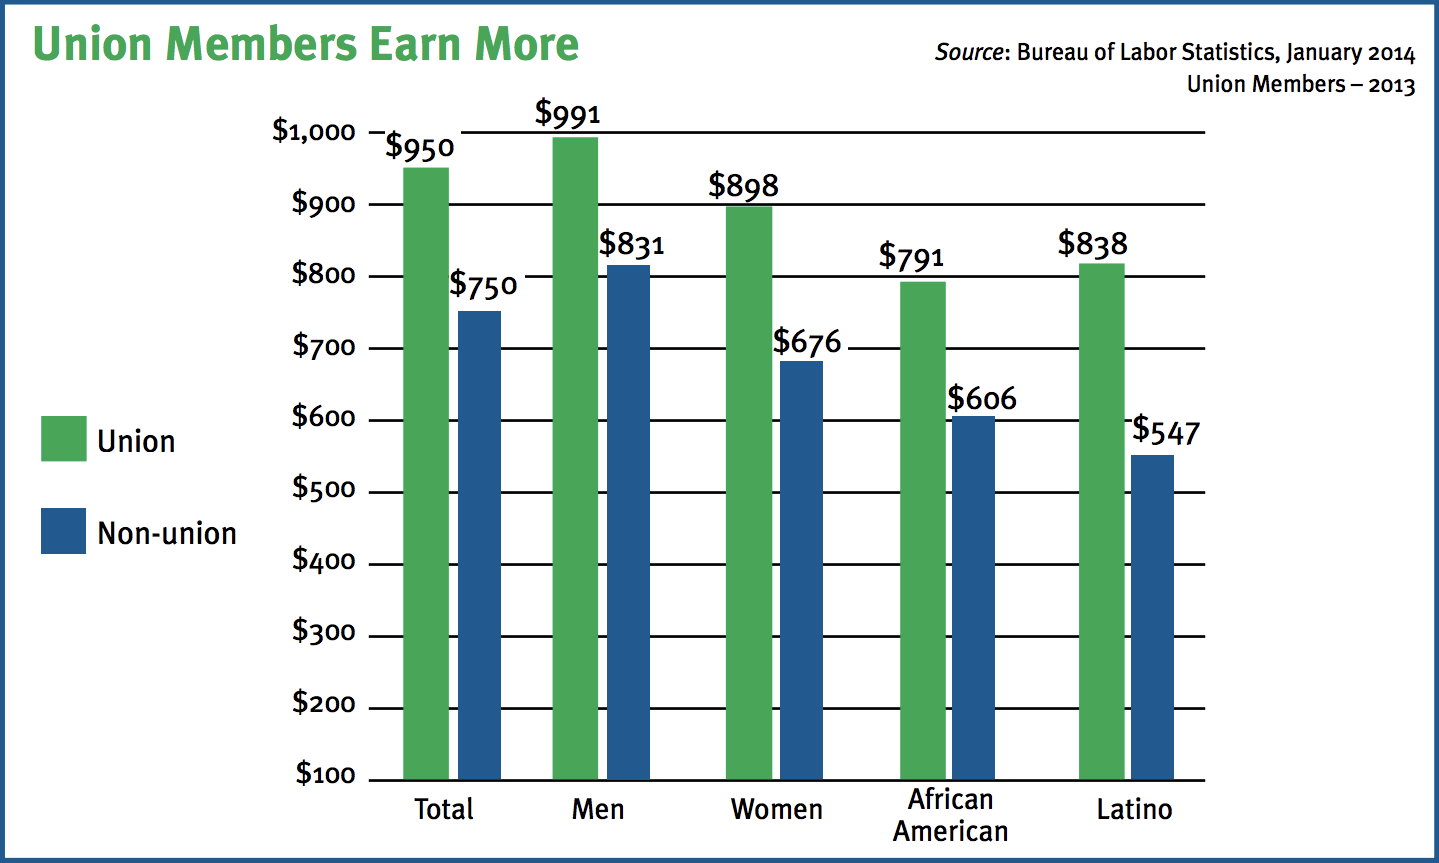 Workers who are union members earn 26.7 percent more than non-union workers.